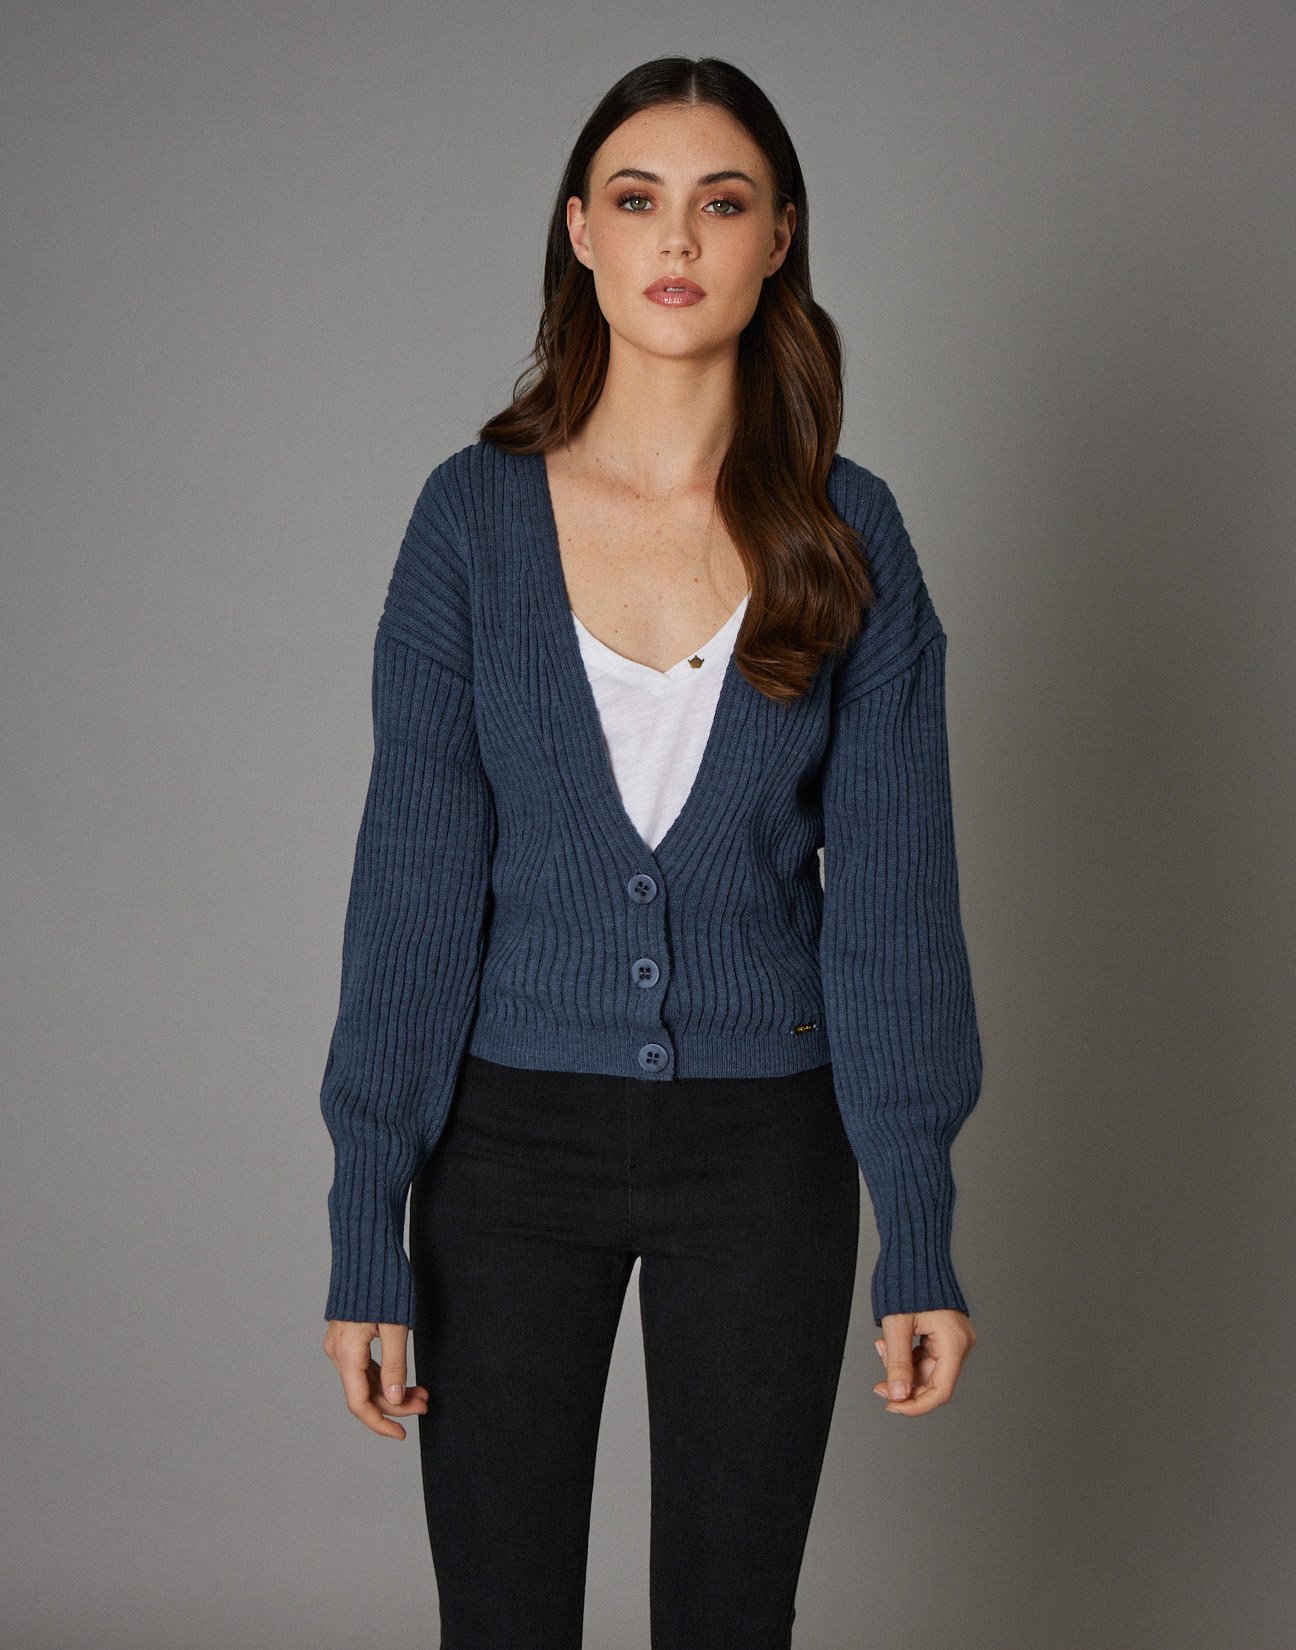 Knit cardigan with buttons